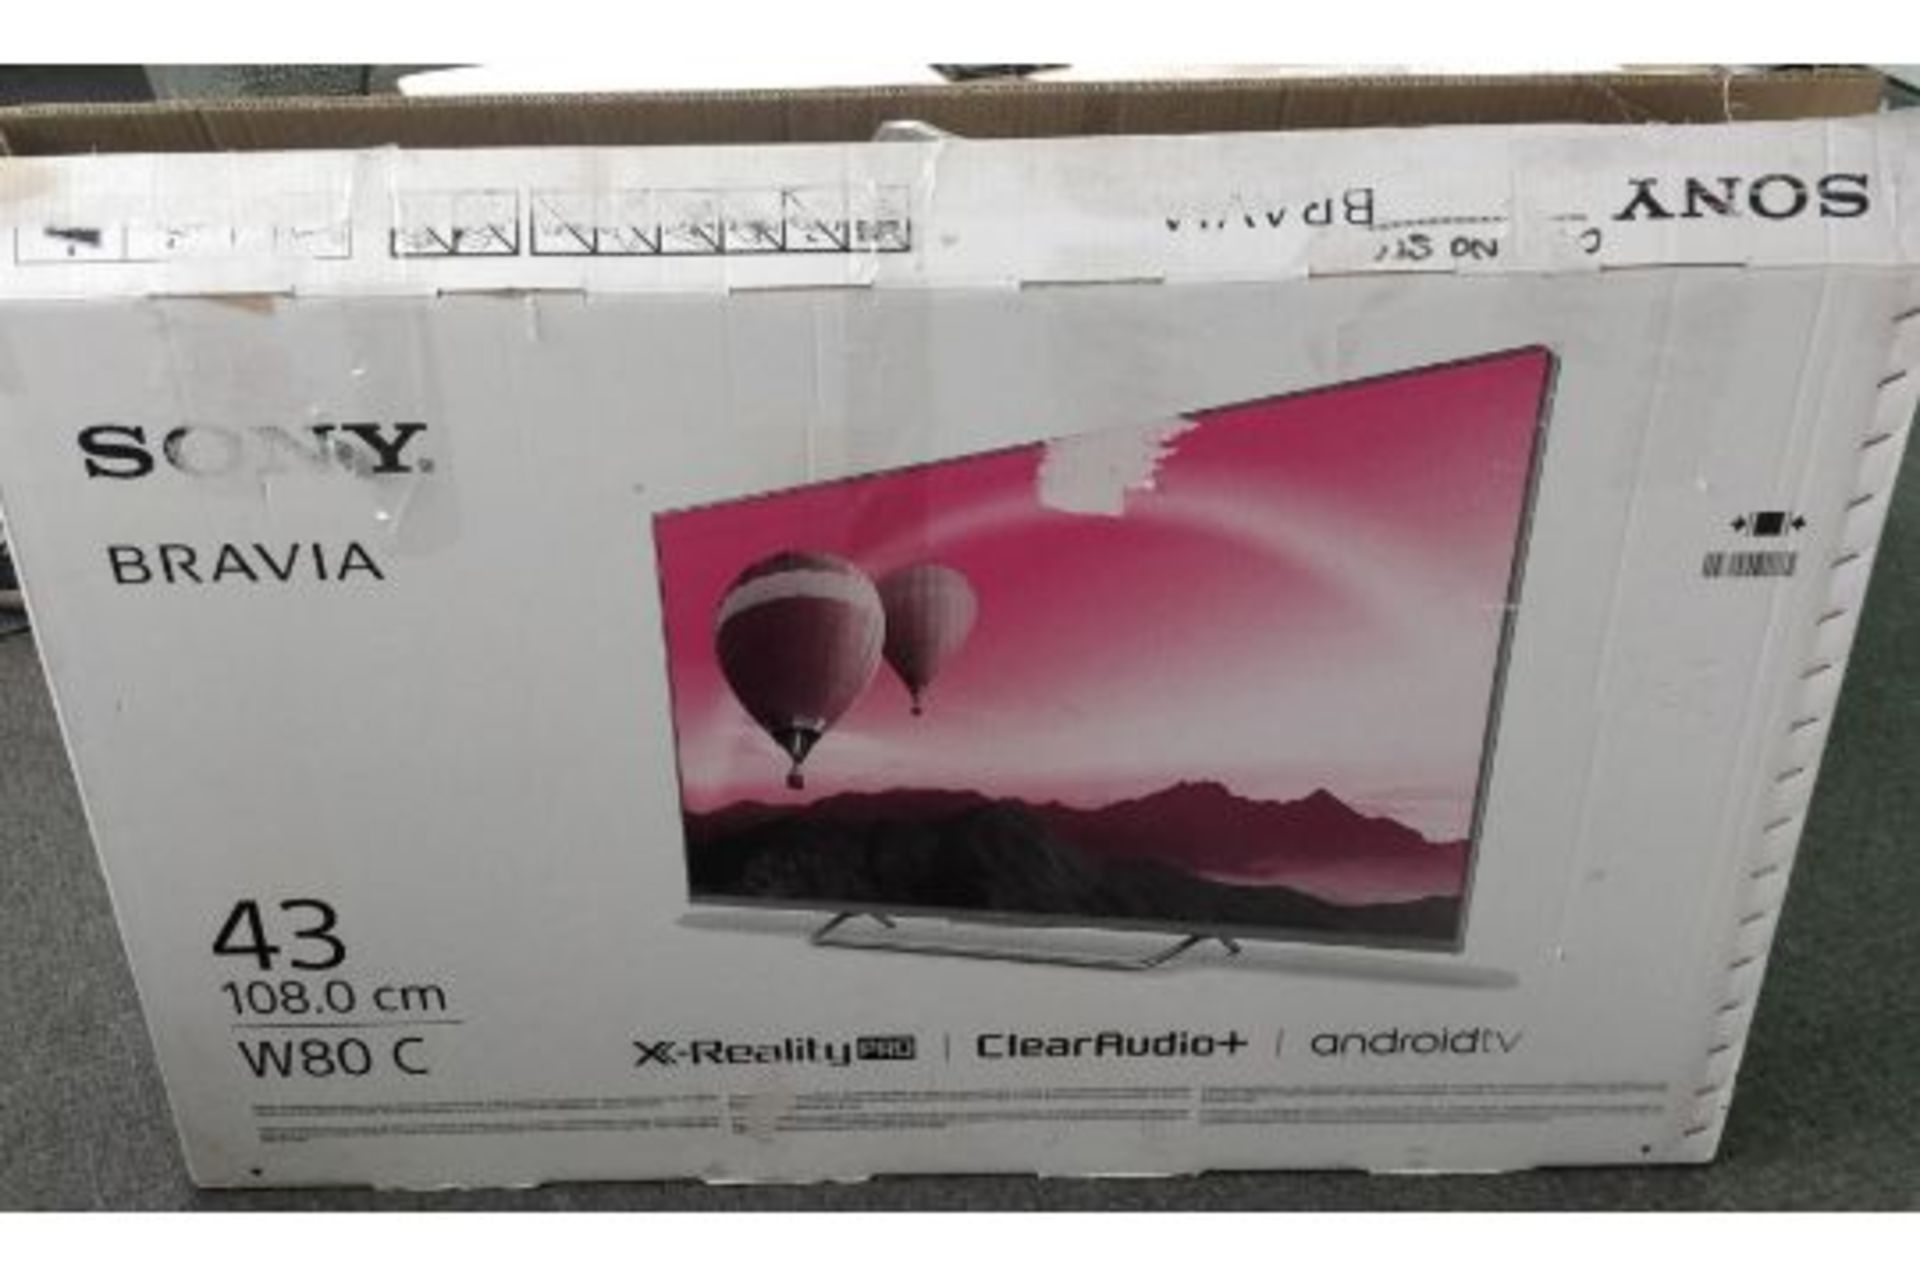 1 x Sony KDL-43W807C 43 inch Smart 3D Full HD TV - Features Android TV, X-Reality Pro, Motionflow XR - Image 2 of 8